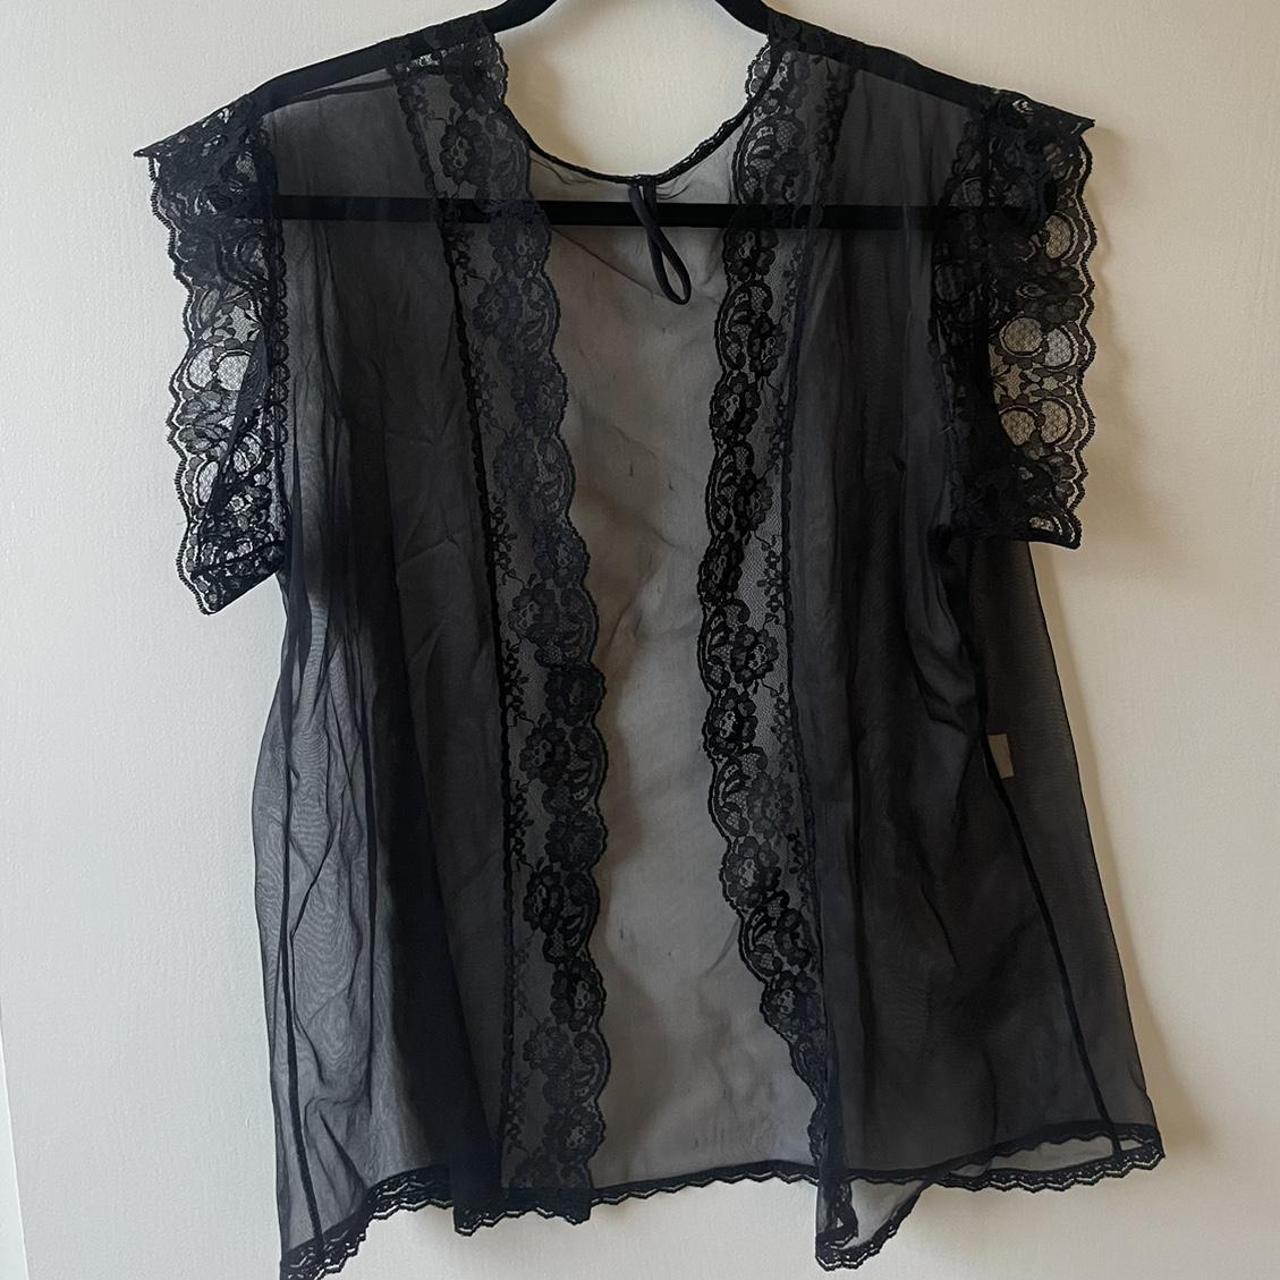 lacey black shaw cover up top - Depop